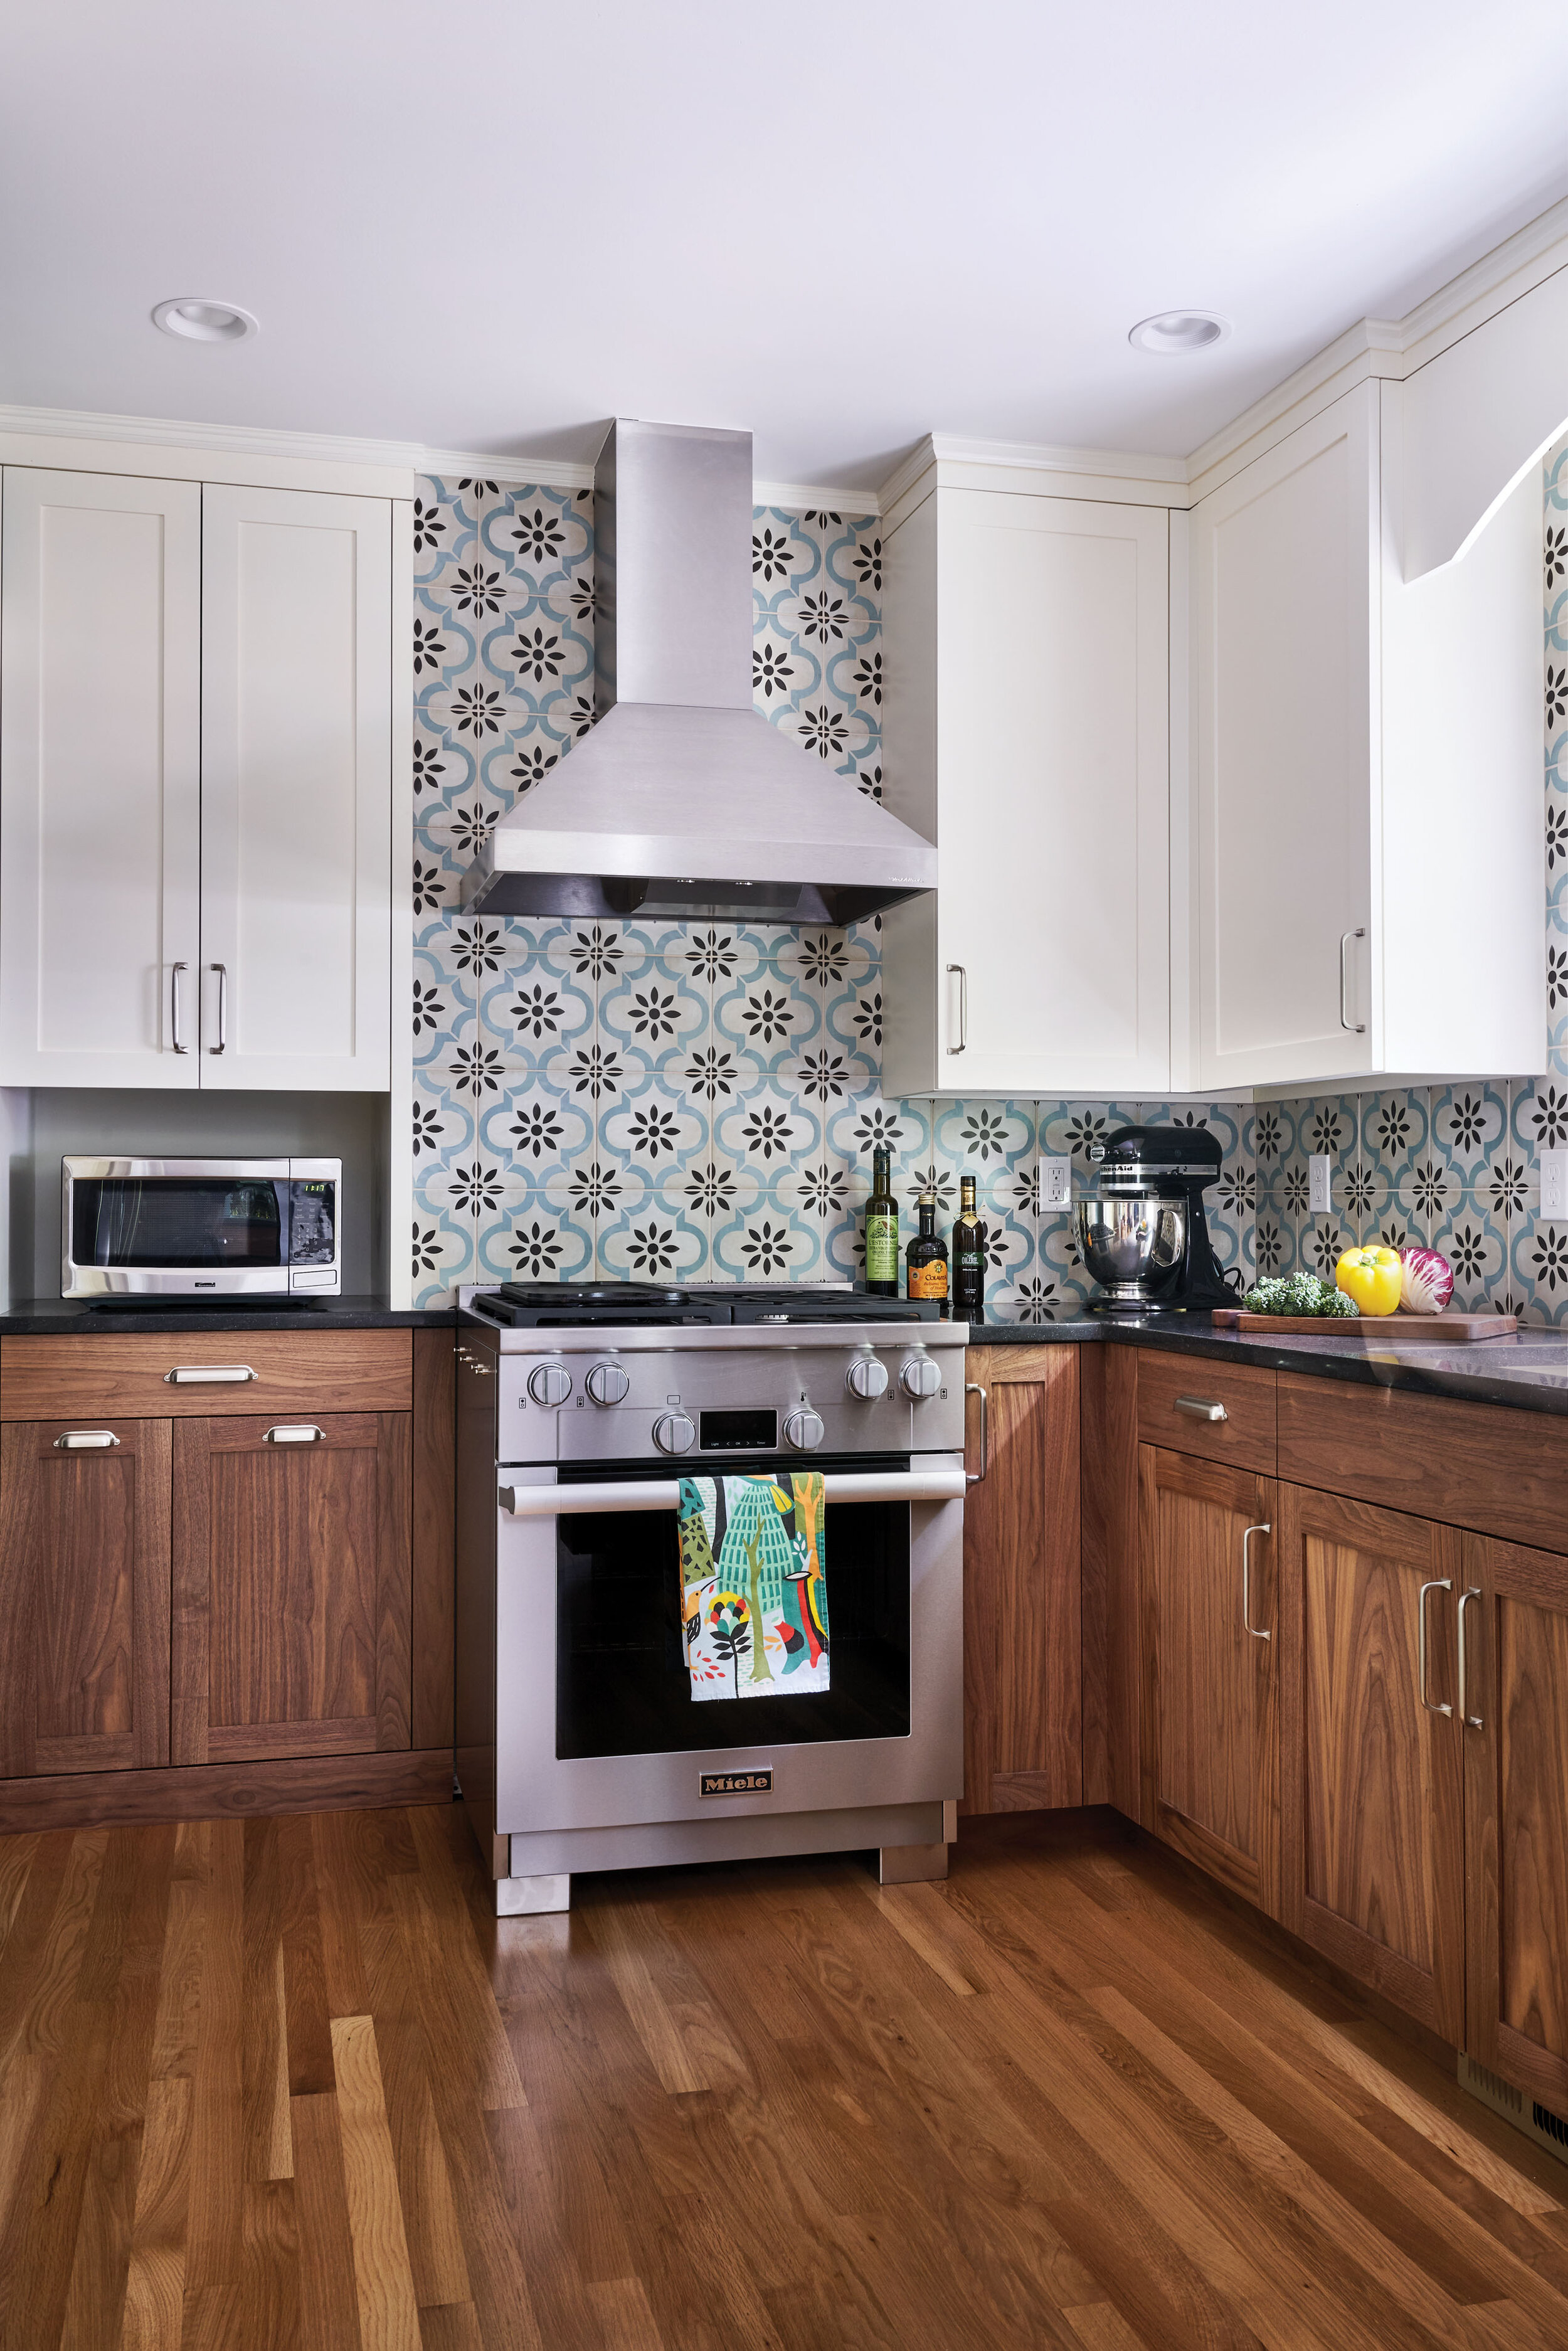 Top and bottom cabinet colors create continuity with tile and flooring. 